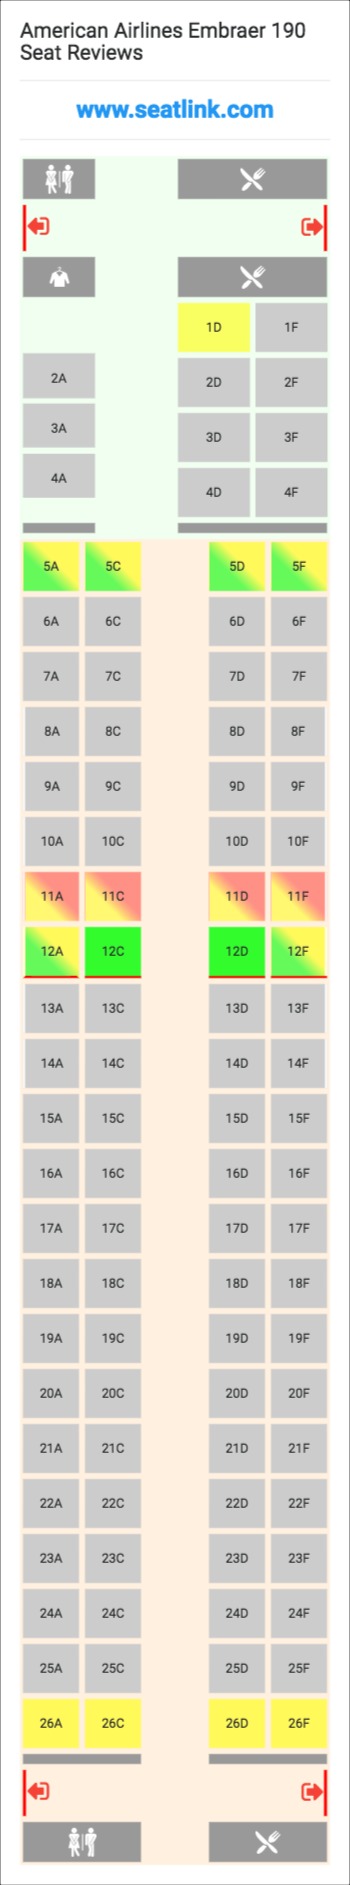 American Airlines Embraer 190 Seating Chart - Updated ...